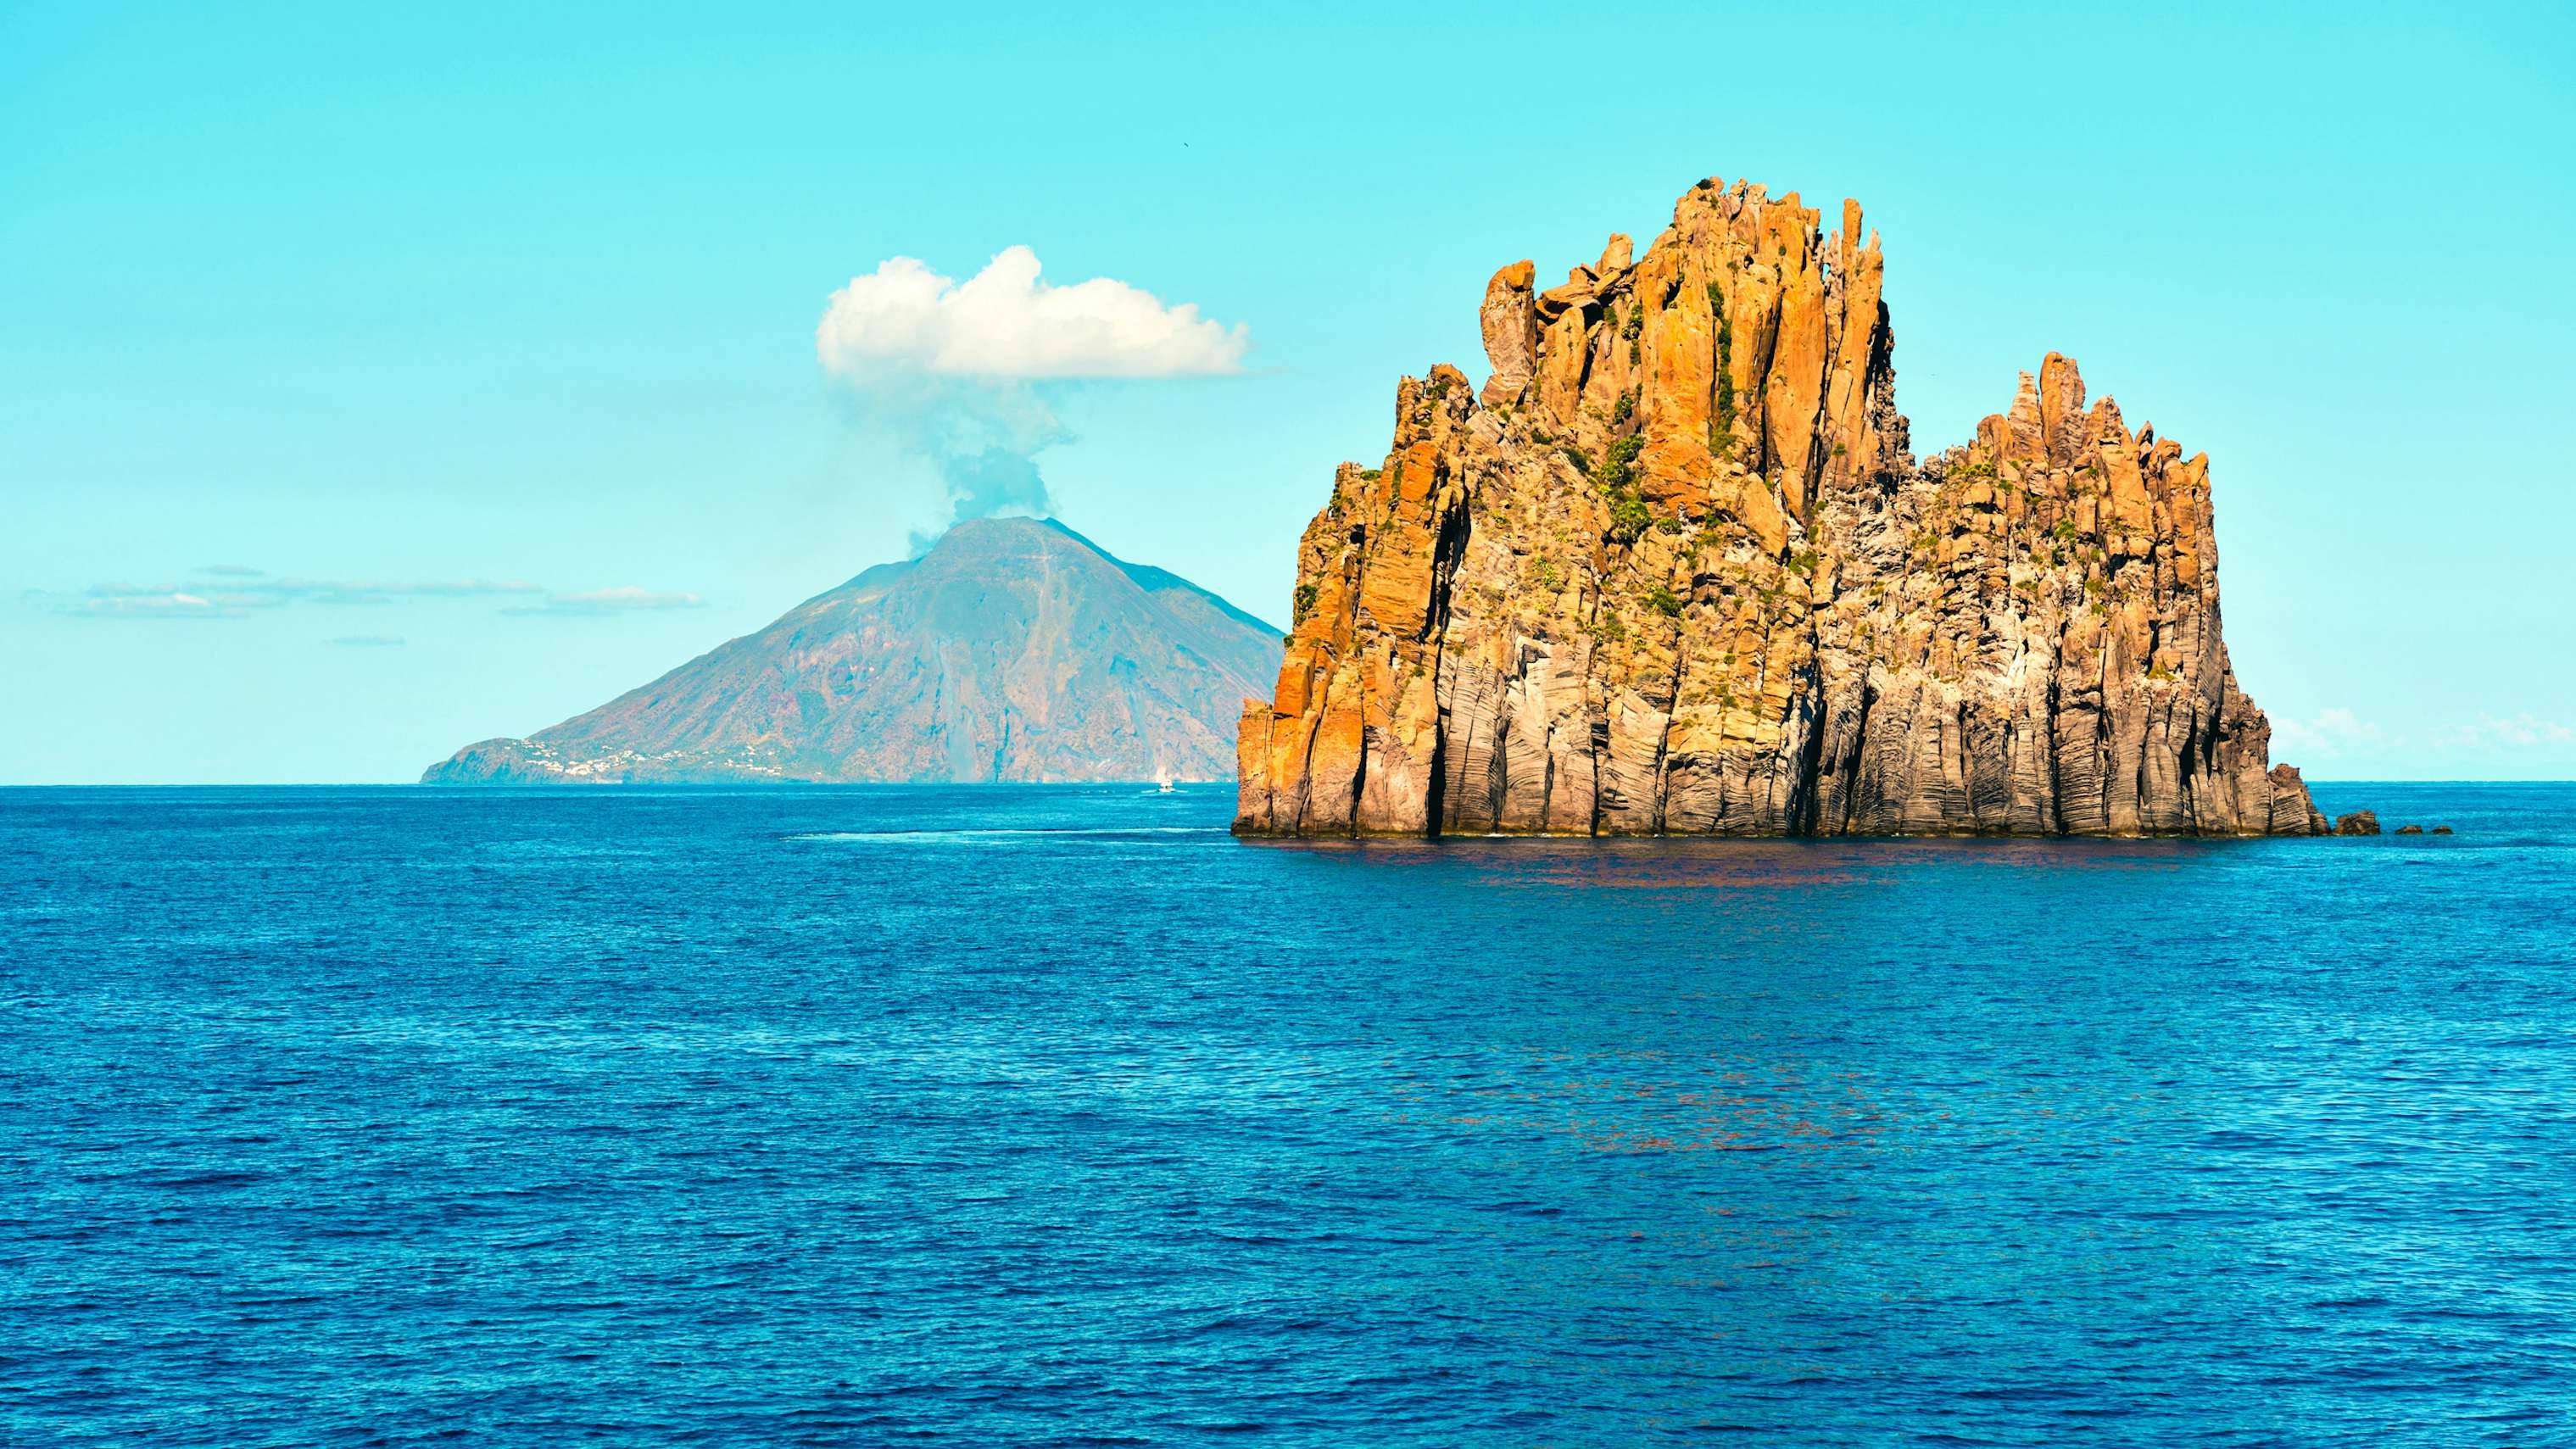 Sicily Crewed Yacht Charter - Volcano Stromboli Archipelago Eolie Sicily Italy with blue waters